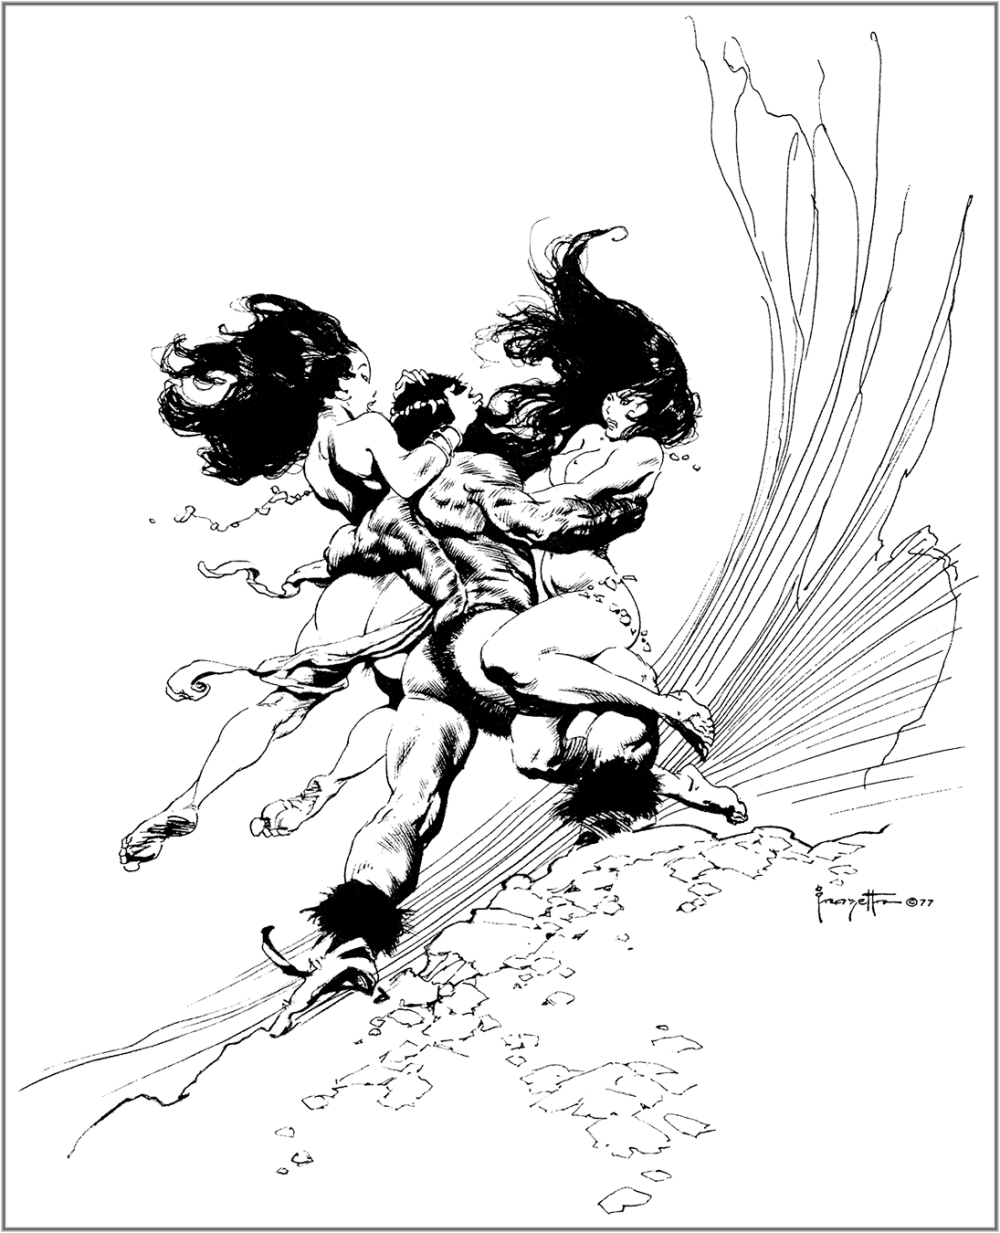 XXX_011L_Frank_Frazetta_Women_of_the_Ages_Plate_IV.png